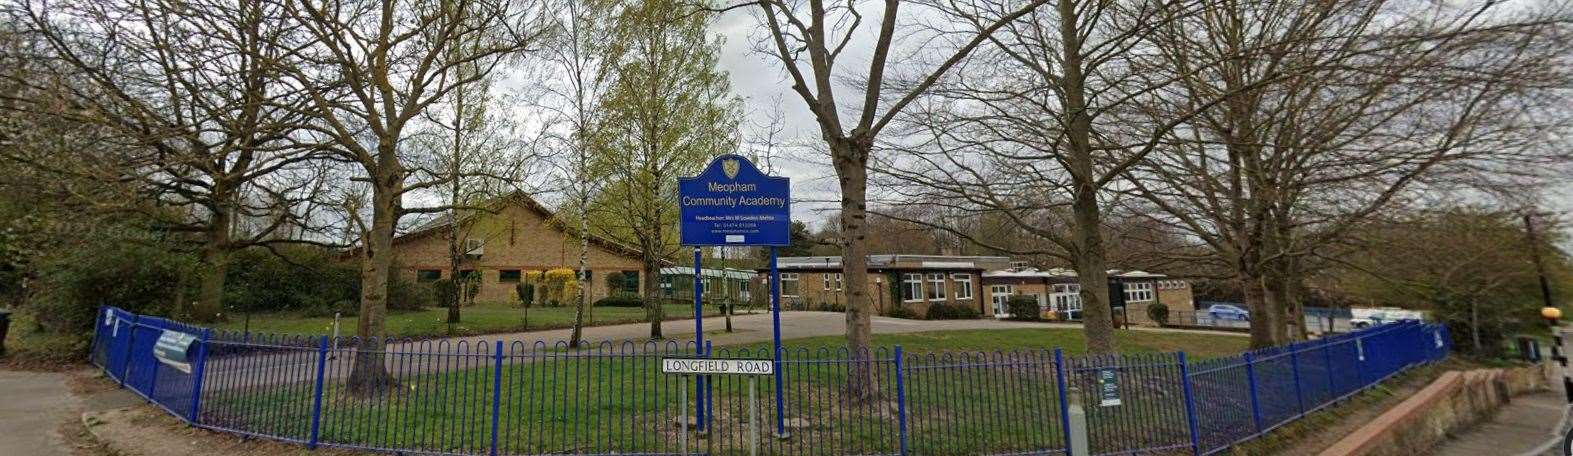 Meopham Community Academy in Longfield Road, Meopham